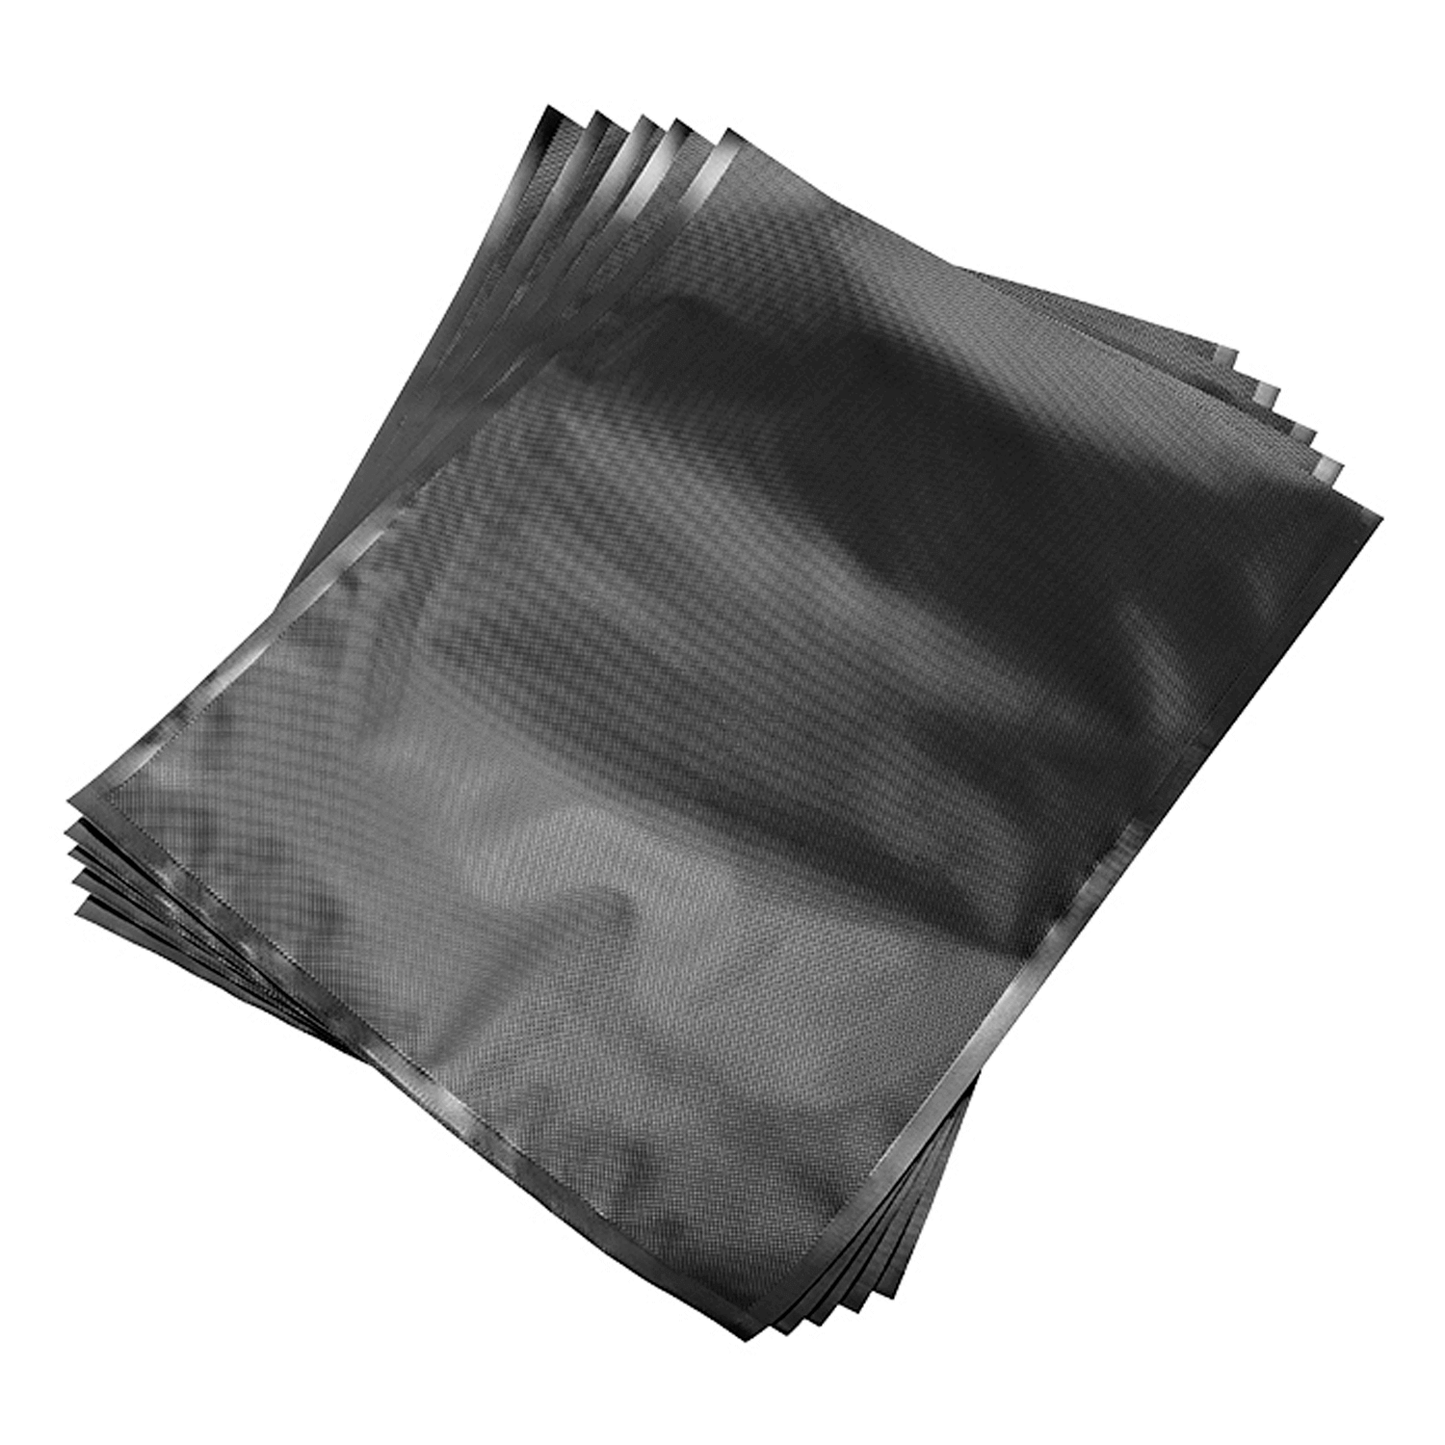 ArmorVac 15"x20" 5mil Precut Vacuum Seal Bags Black & Clear (100 Pack) 131520BCR Harvest & Extraction